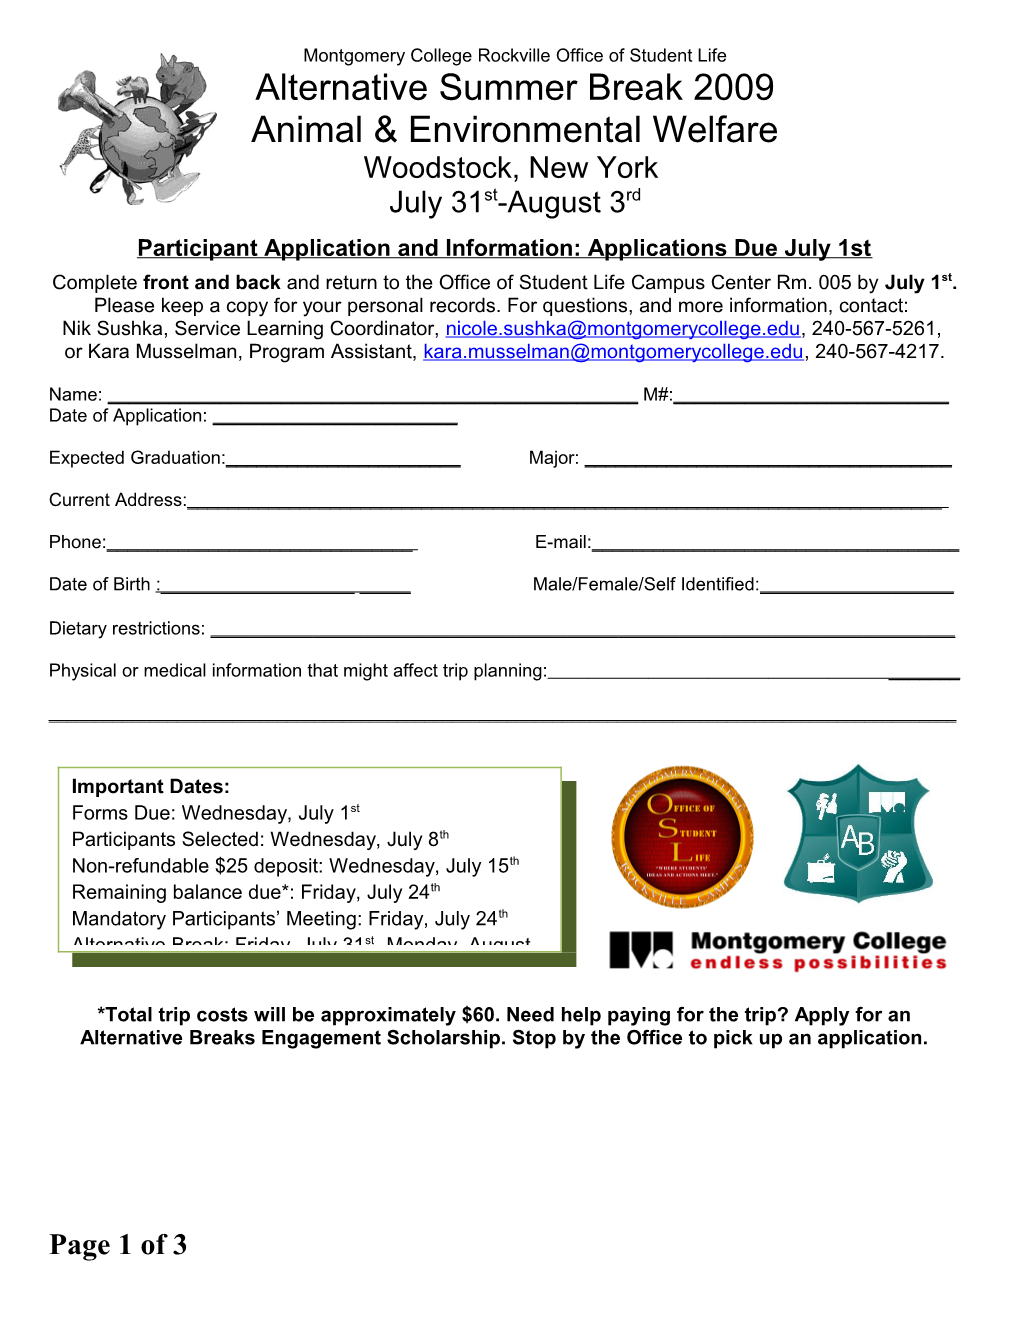 Participant Application and Information: Applications Due July 1St